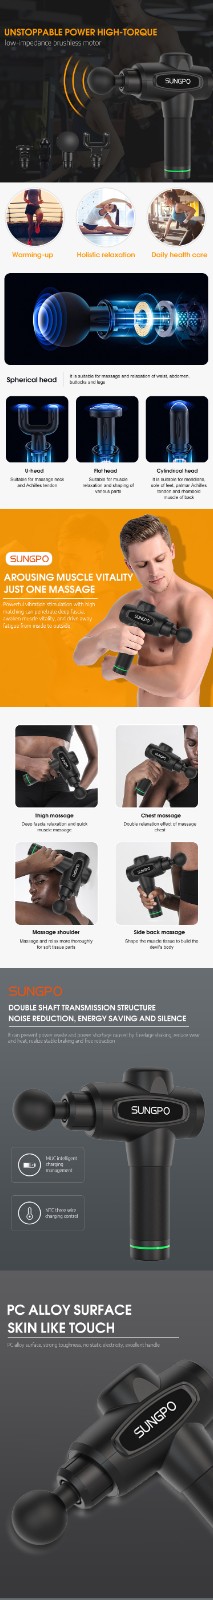 SUNGPO power massager manufacturer for sports injuries-2